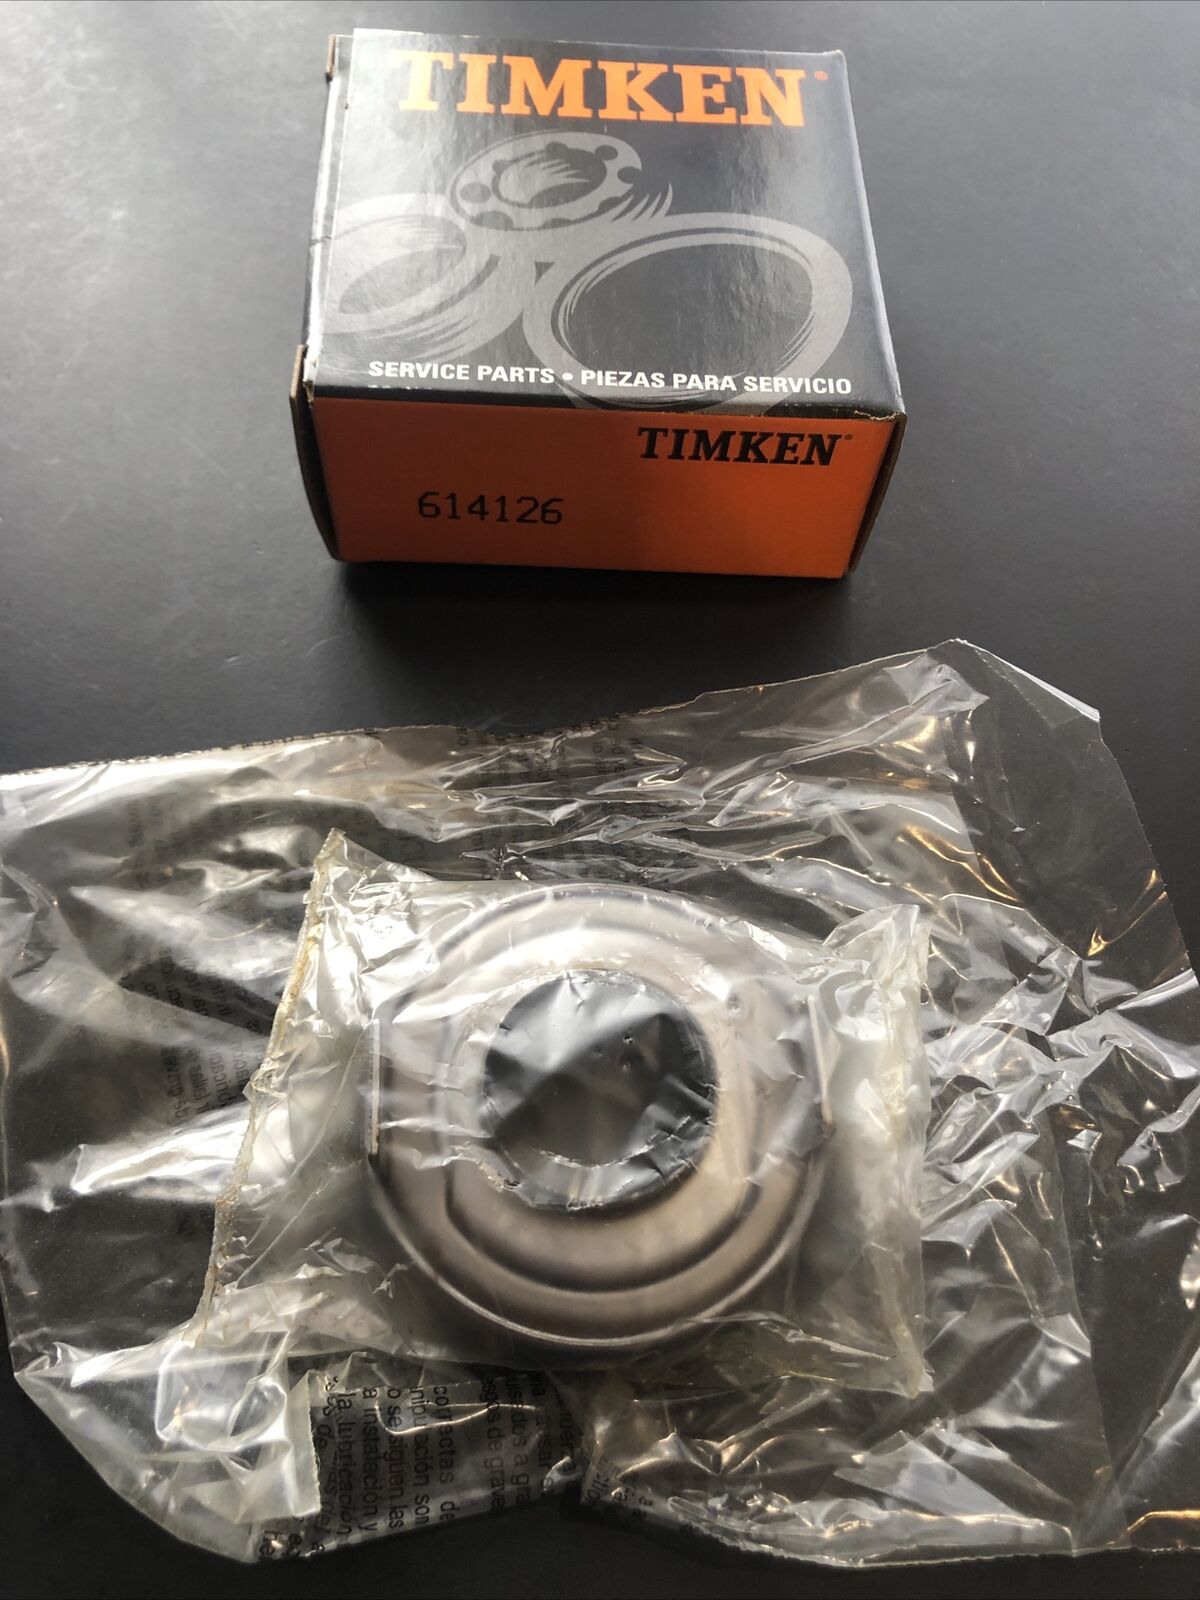 🌟🌟🌟🌟🌟Clutch Release Bearing Timken 614126 For 1979-95 Plymouth Colt Laser